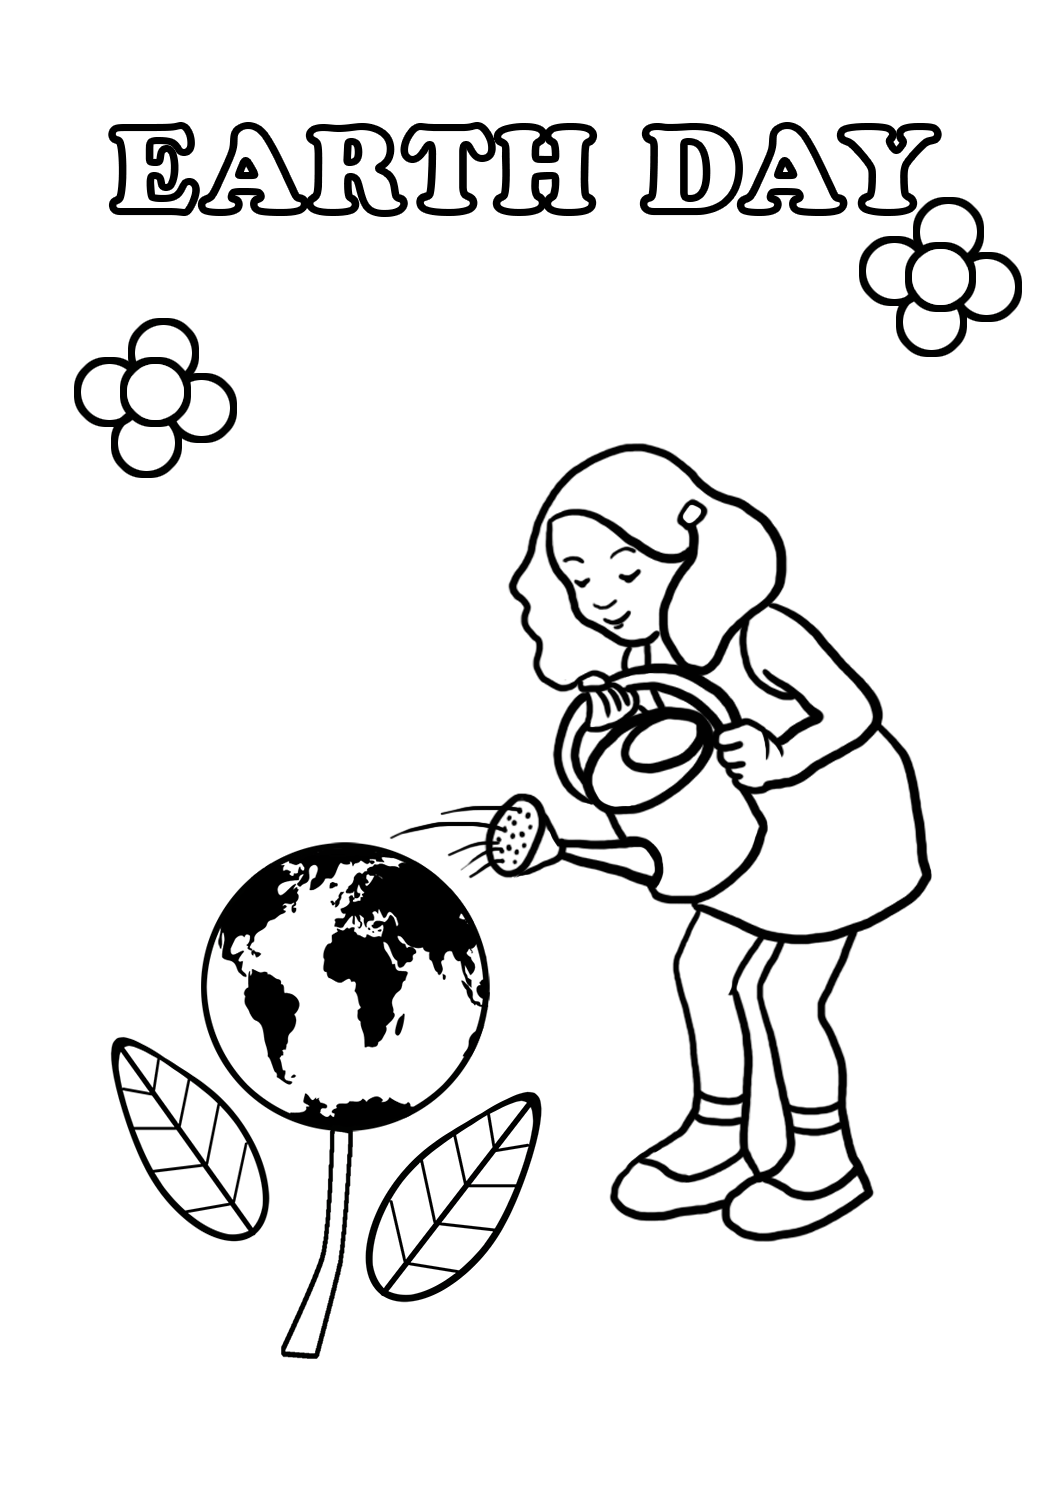 Earth Day coloring page girl watering eart